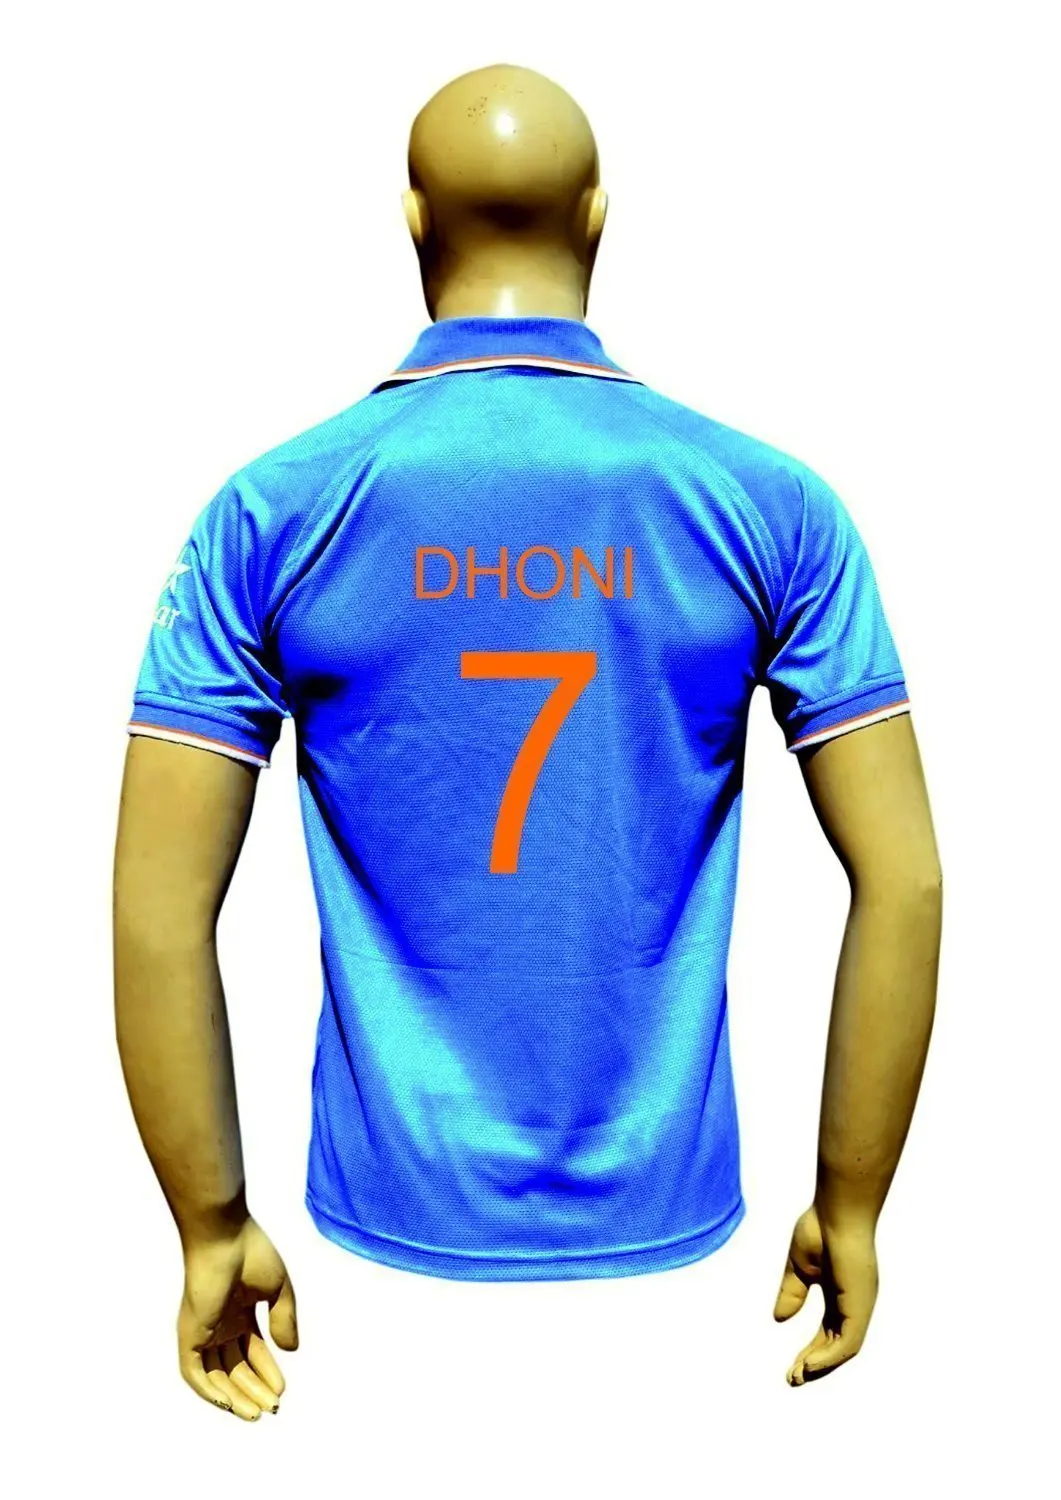 india t20 jersey 2016 buy